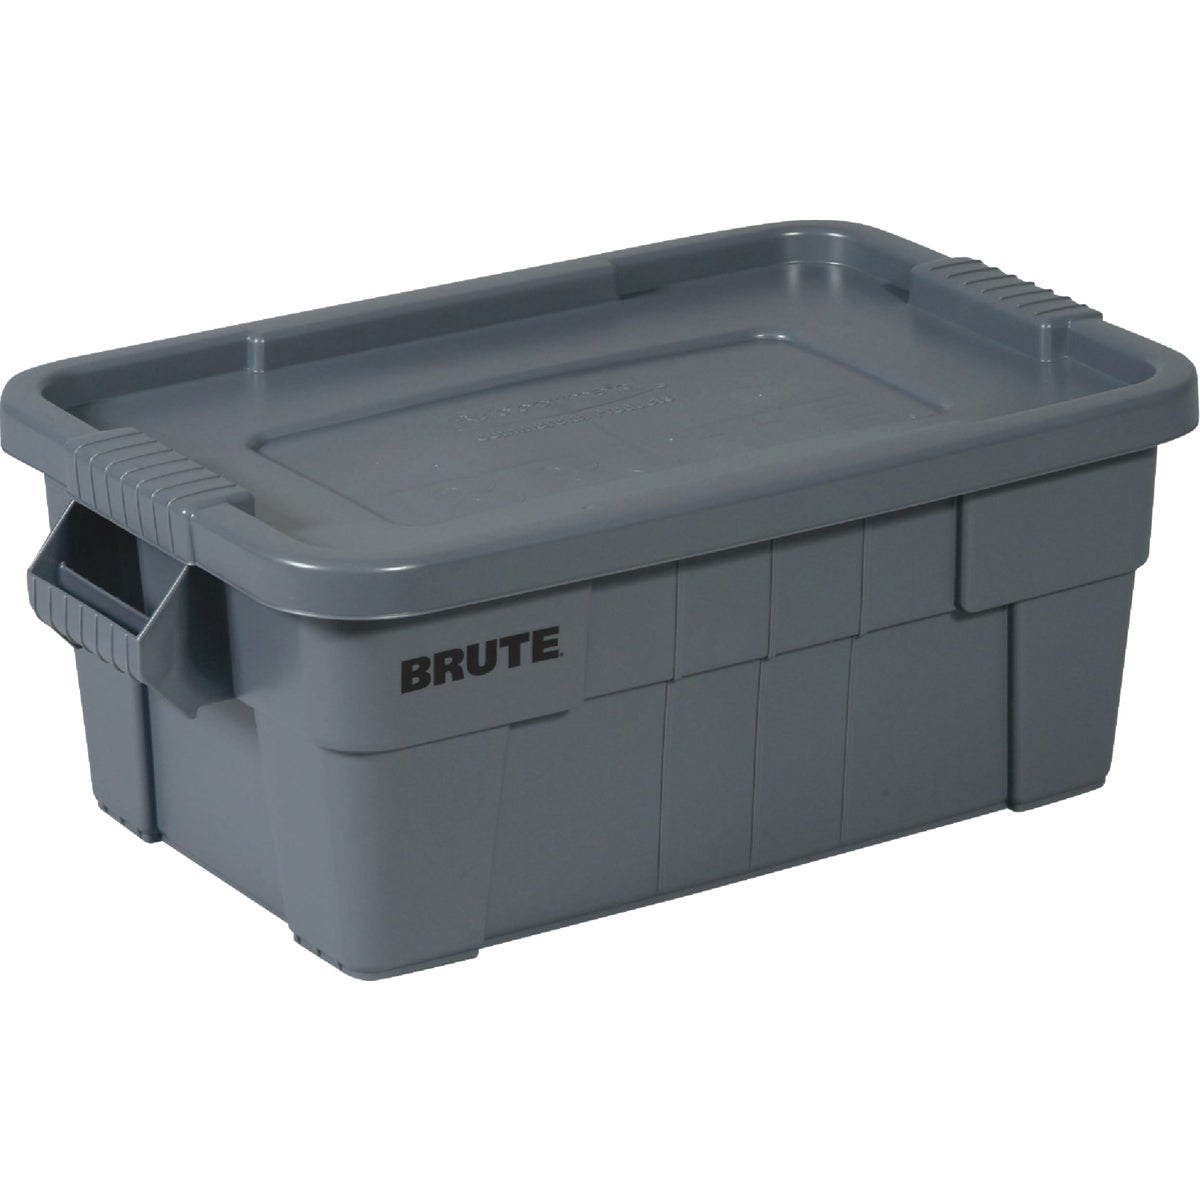 Rubbermaid Commercial Brute 14 Gal. Gray Storage Tote with Lid